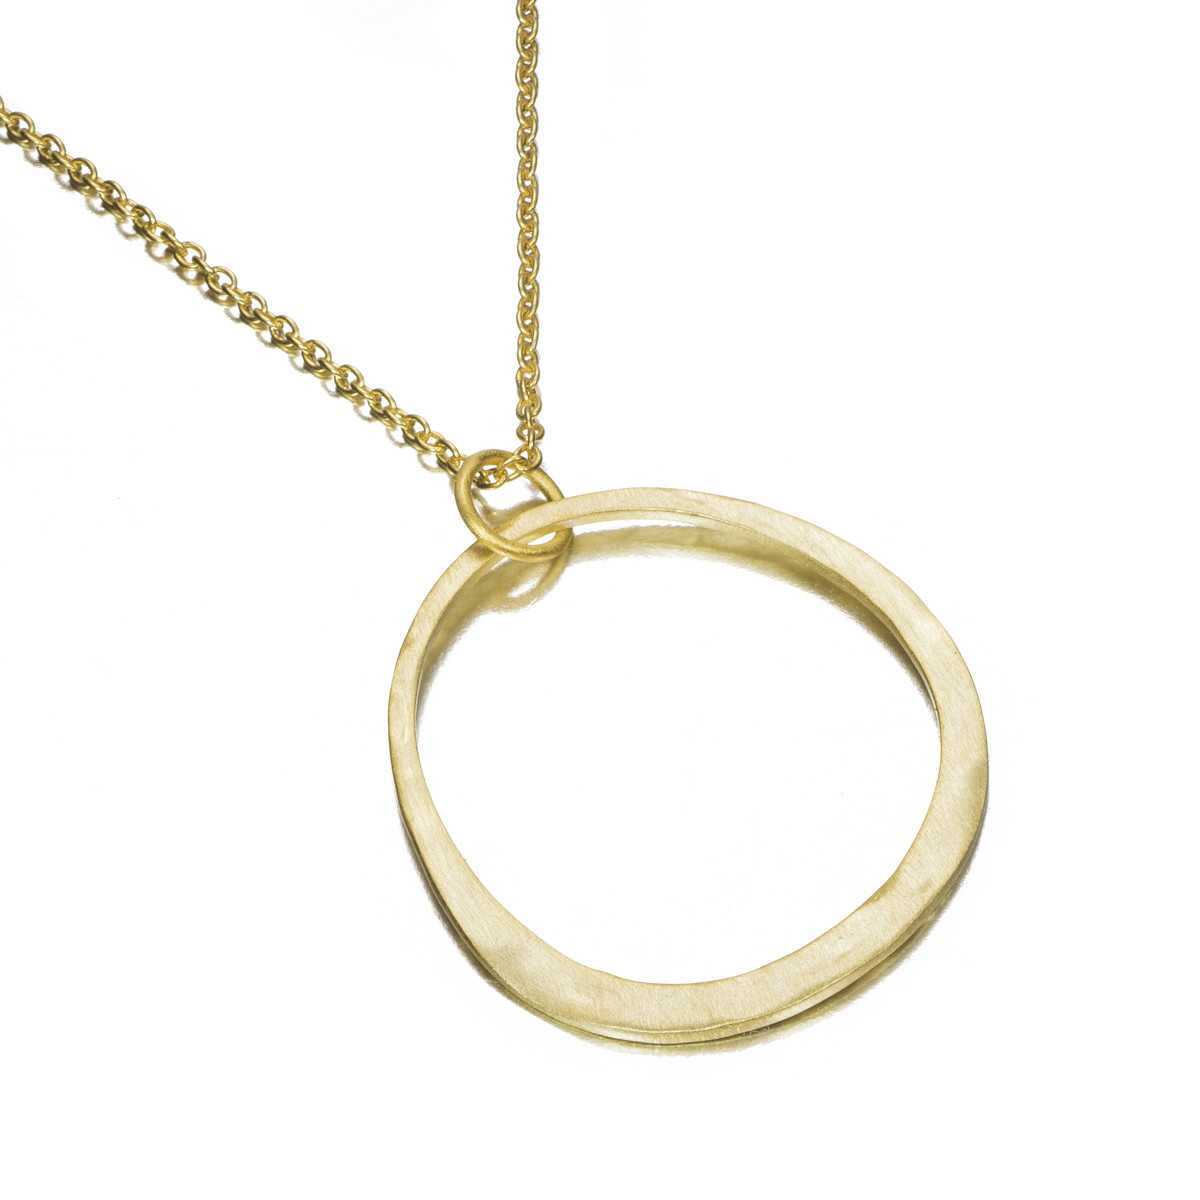 OLYMPIA Pendant in Silver. 18k Gold Vermeil